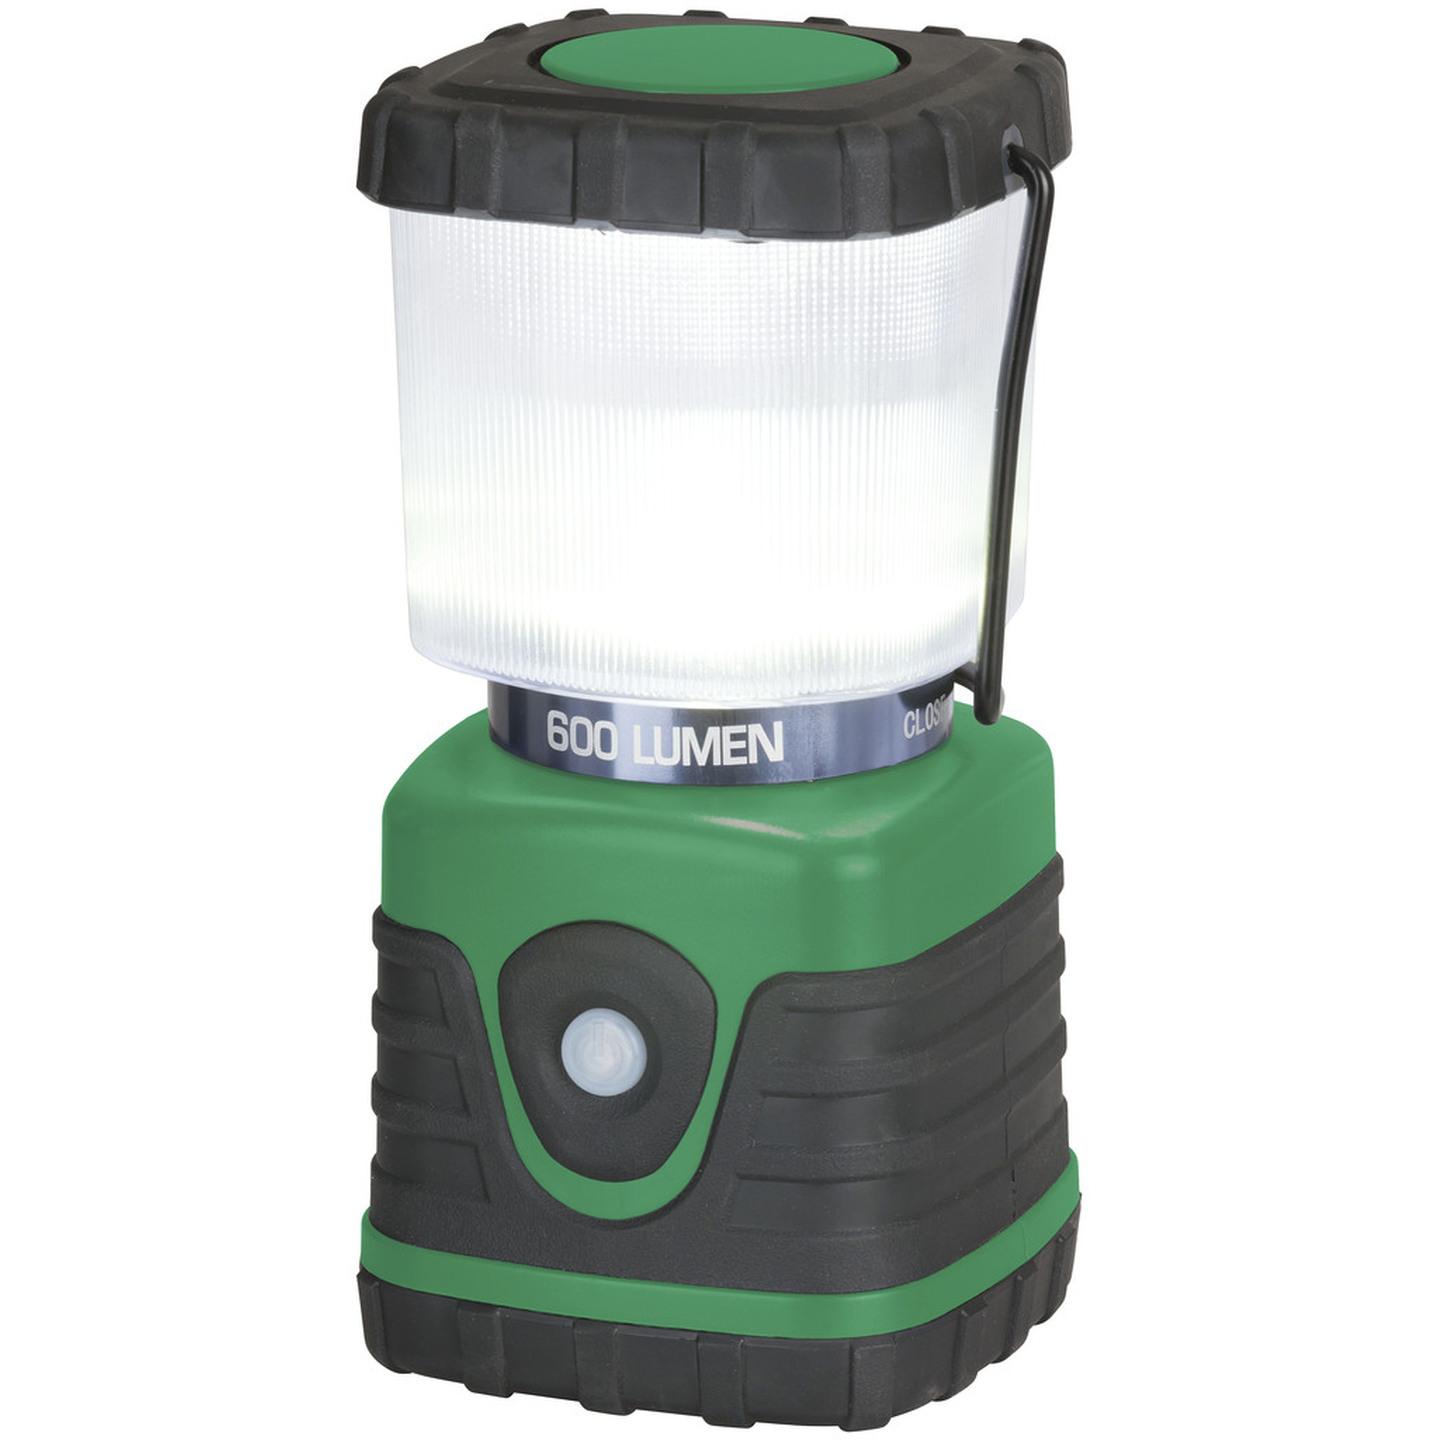 Rechargeable 600 Lumen Lantern with Cree LED and USB